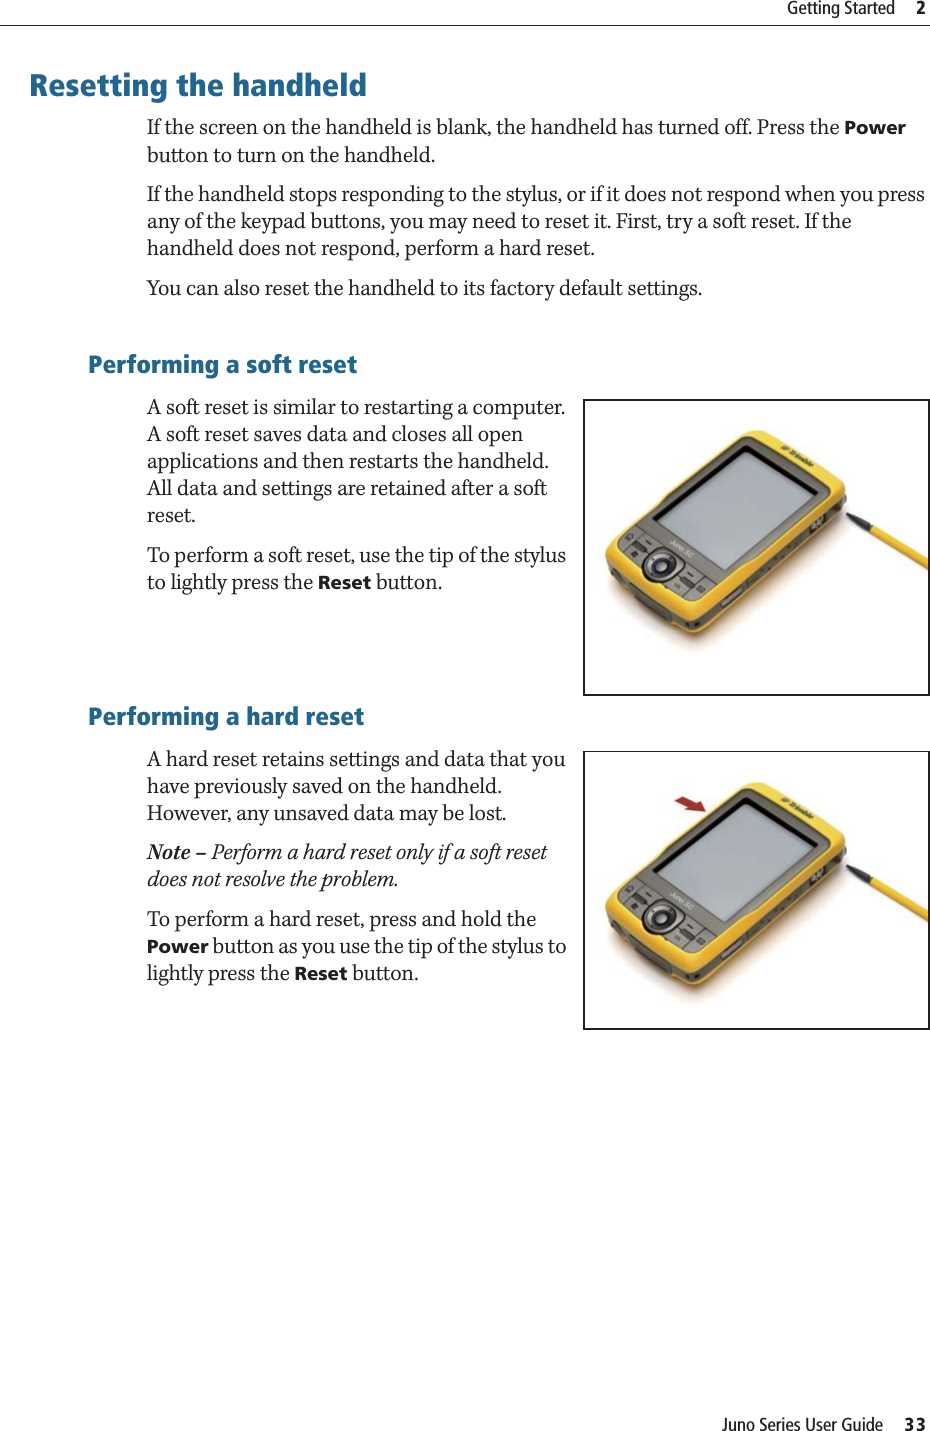 Juno Series User Guide     33Getting Started     2Resetting the handheldIf the screen on the handheld is blank, the handheld has turned off. Press the Power button to turn on the handheld.If the handheld stops responding to the stylus, or if it does not respond when you press any of the keypad buttons, you may need to reset it. First, try a soft reset. If the handheld does not respond, perform a hard reset.You can also reset the handheld to its factory default settings.Performing a soft resetA soft reset is similar to restarting a computer. A soft reset saves data and closes all open applications and then restarts the handheld. All data and settings are retained after a soft reset.To perform a soft reset, use the tip of the stylus to lightly press the Reset button.Performing a hard resetA hard reset retains settings and data that you have previously saved on the handheld. However, any unsaved data may be lost.Note – Perform a hard reset only if a soft reset does not resolve the problem.To perform a hard reset, press and hold the Power button as you use the tip of the stylus to lightly press the Reset button.